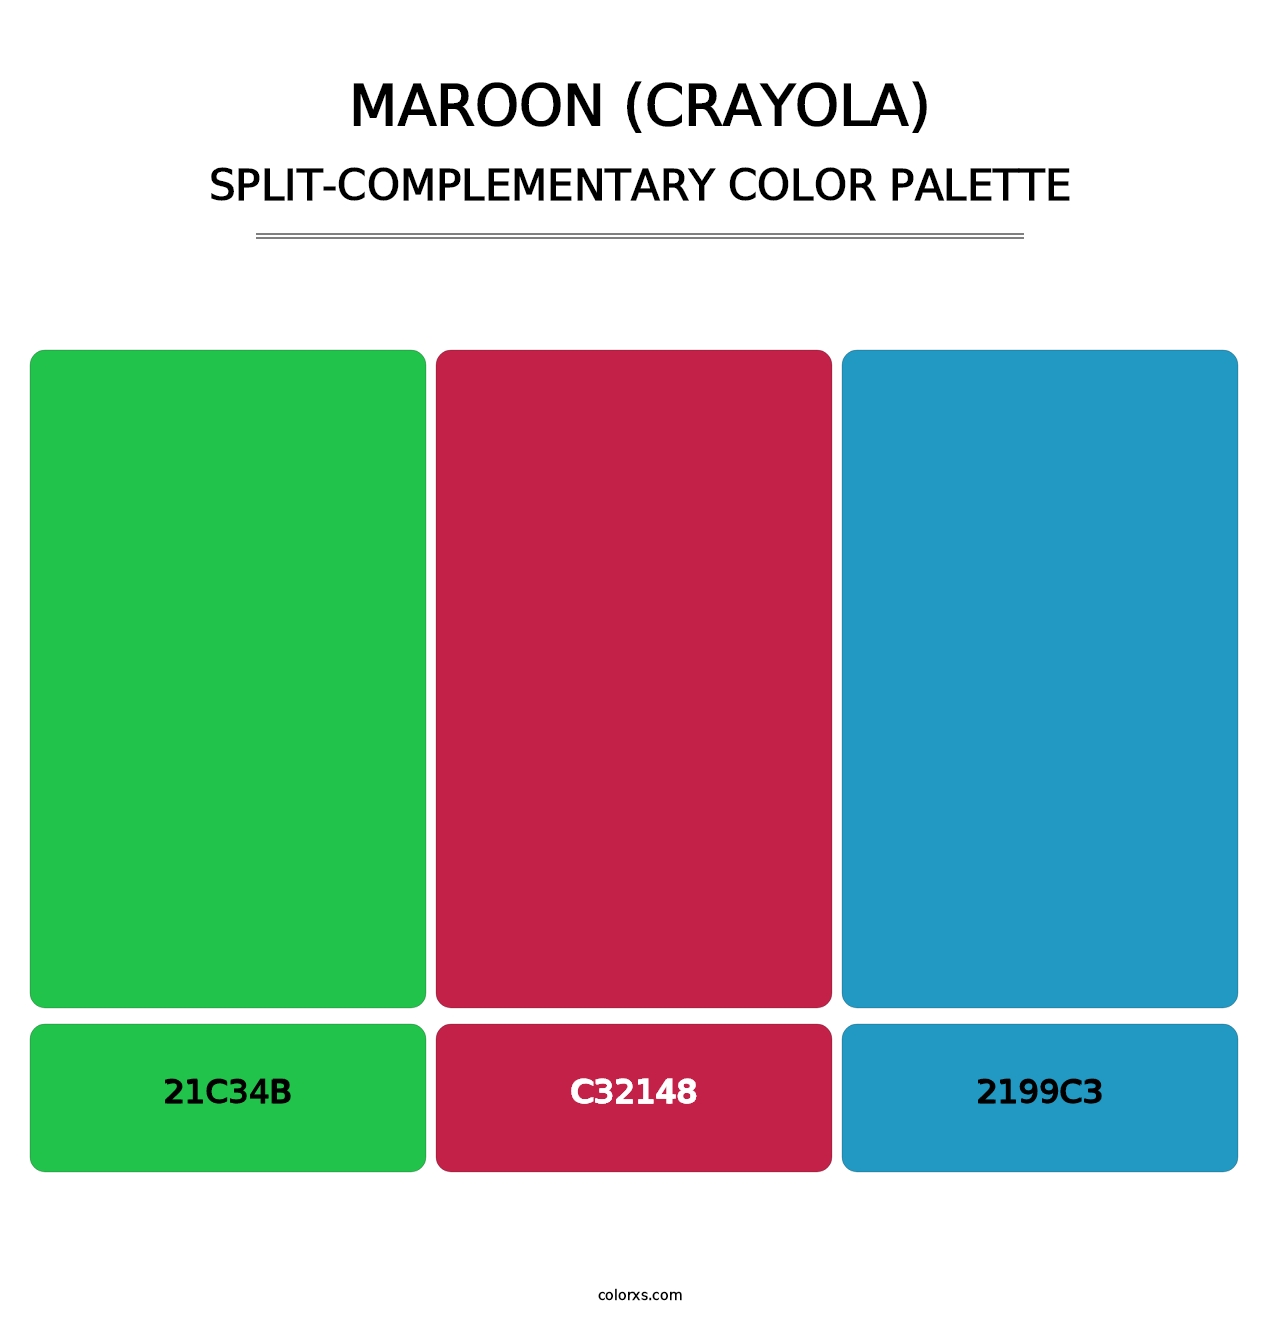 Maroon (Crayola) - Split-Complementary Color Palette